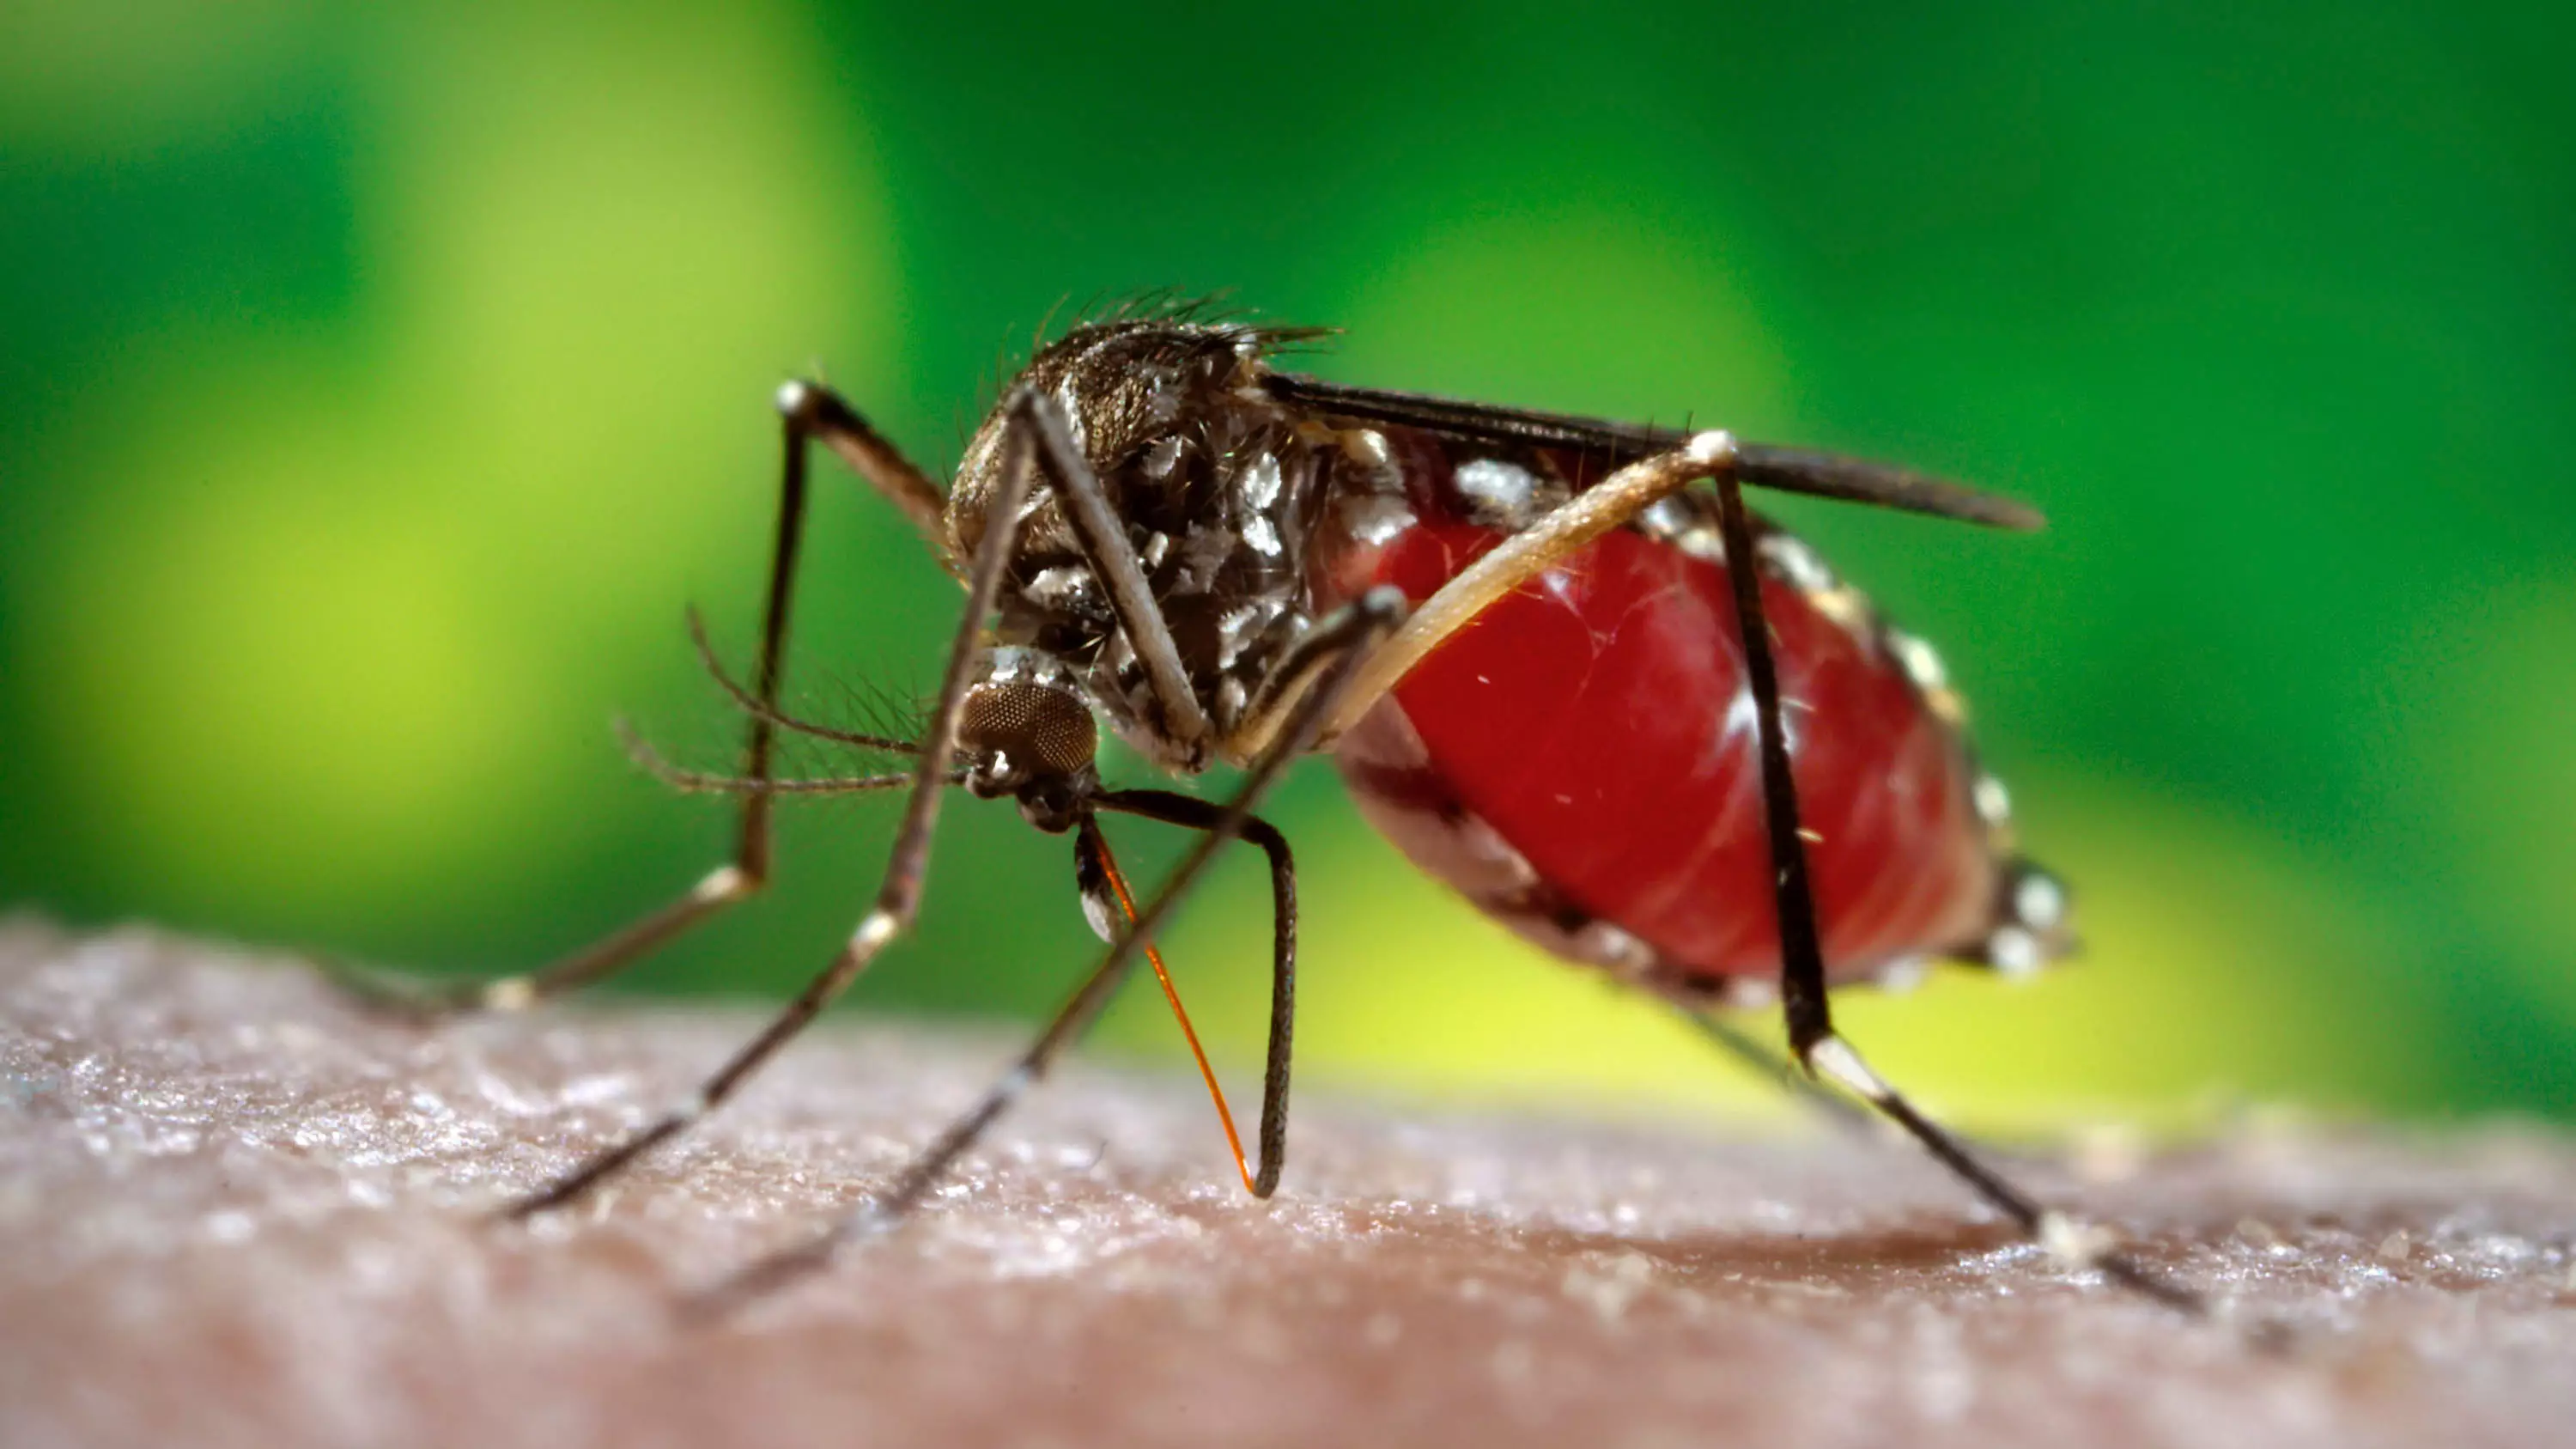 Scientists Discover That Dengue Fever Could Be Transmitted Sexually